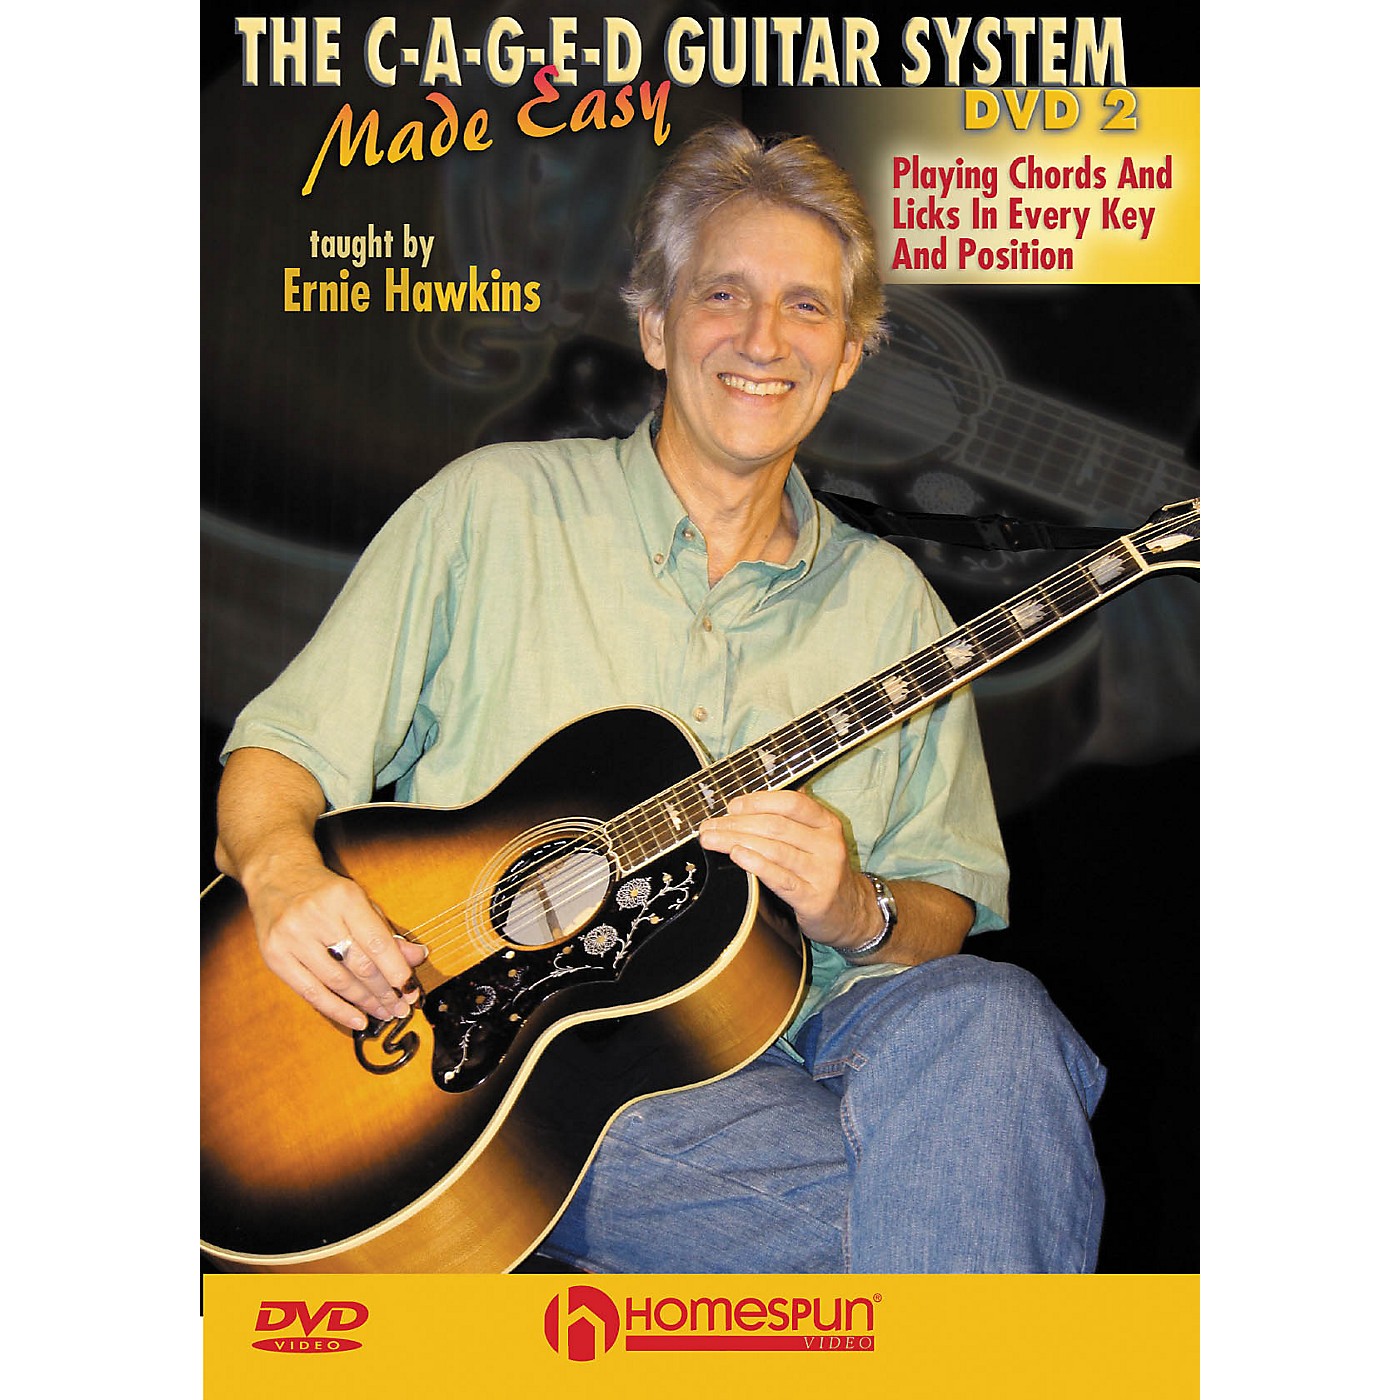 Homespun The C-A-G-E-D Guitar System Made Easy Instructional/Guitar/DVD Series DVD Performed by Ernie Hawkins thumbnail